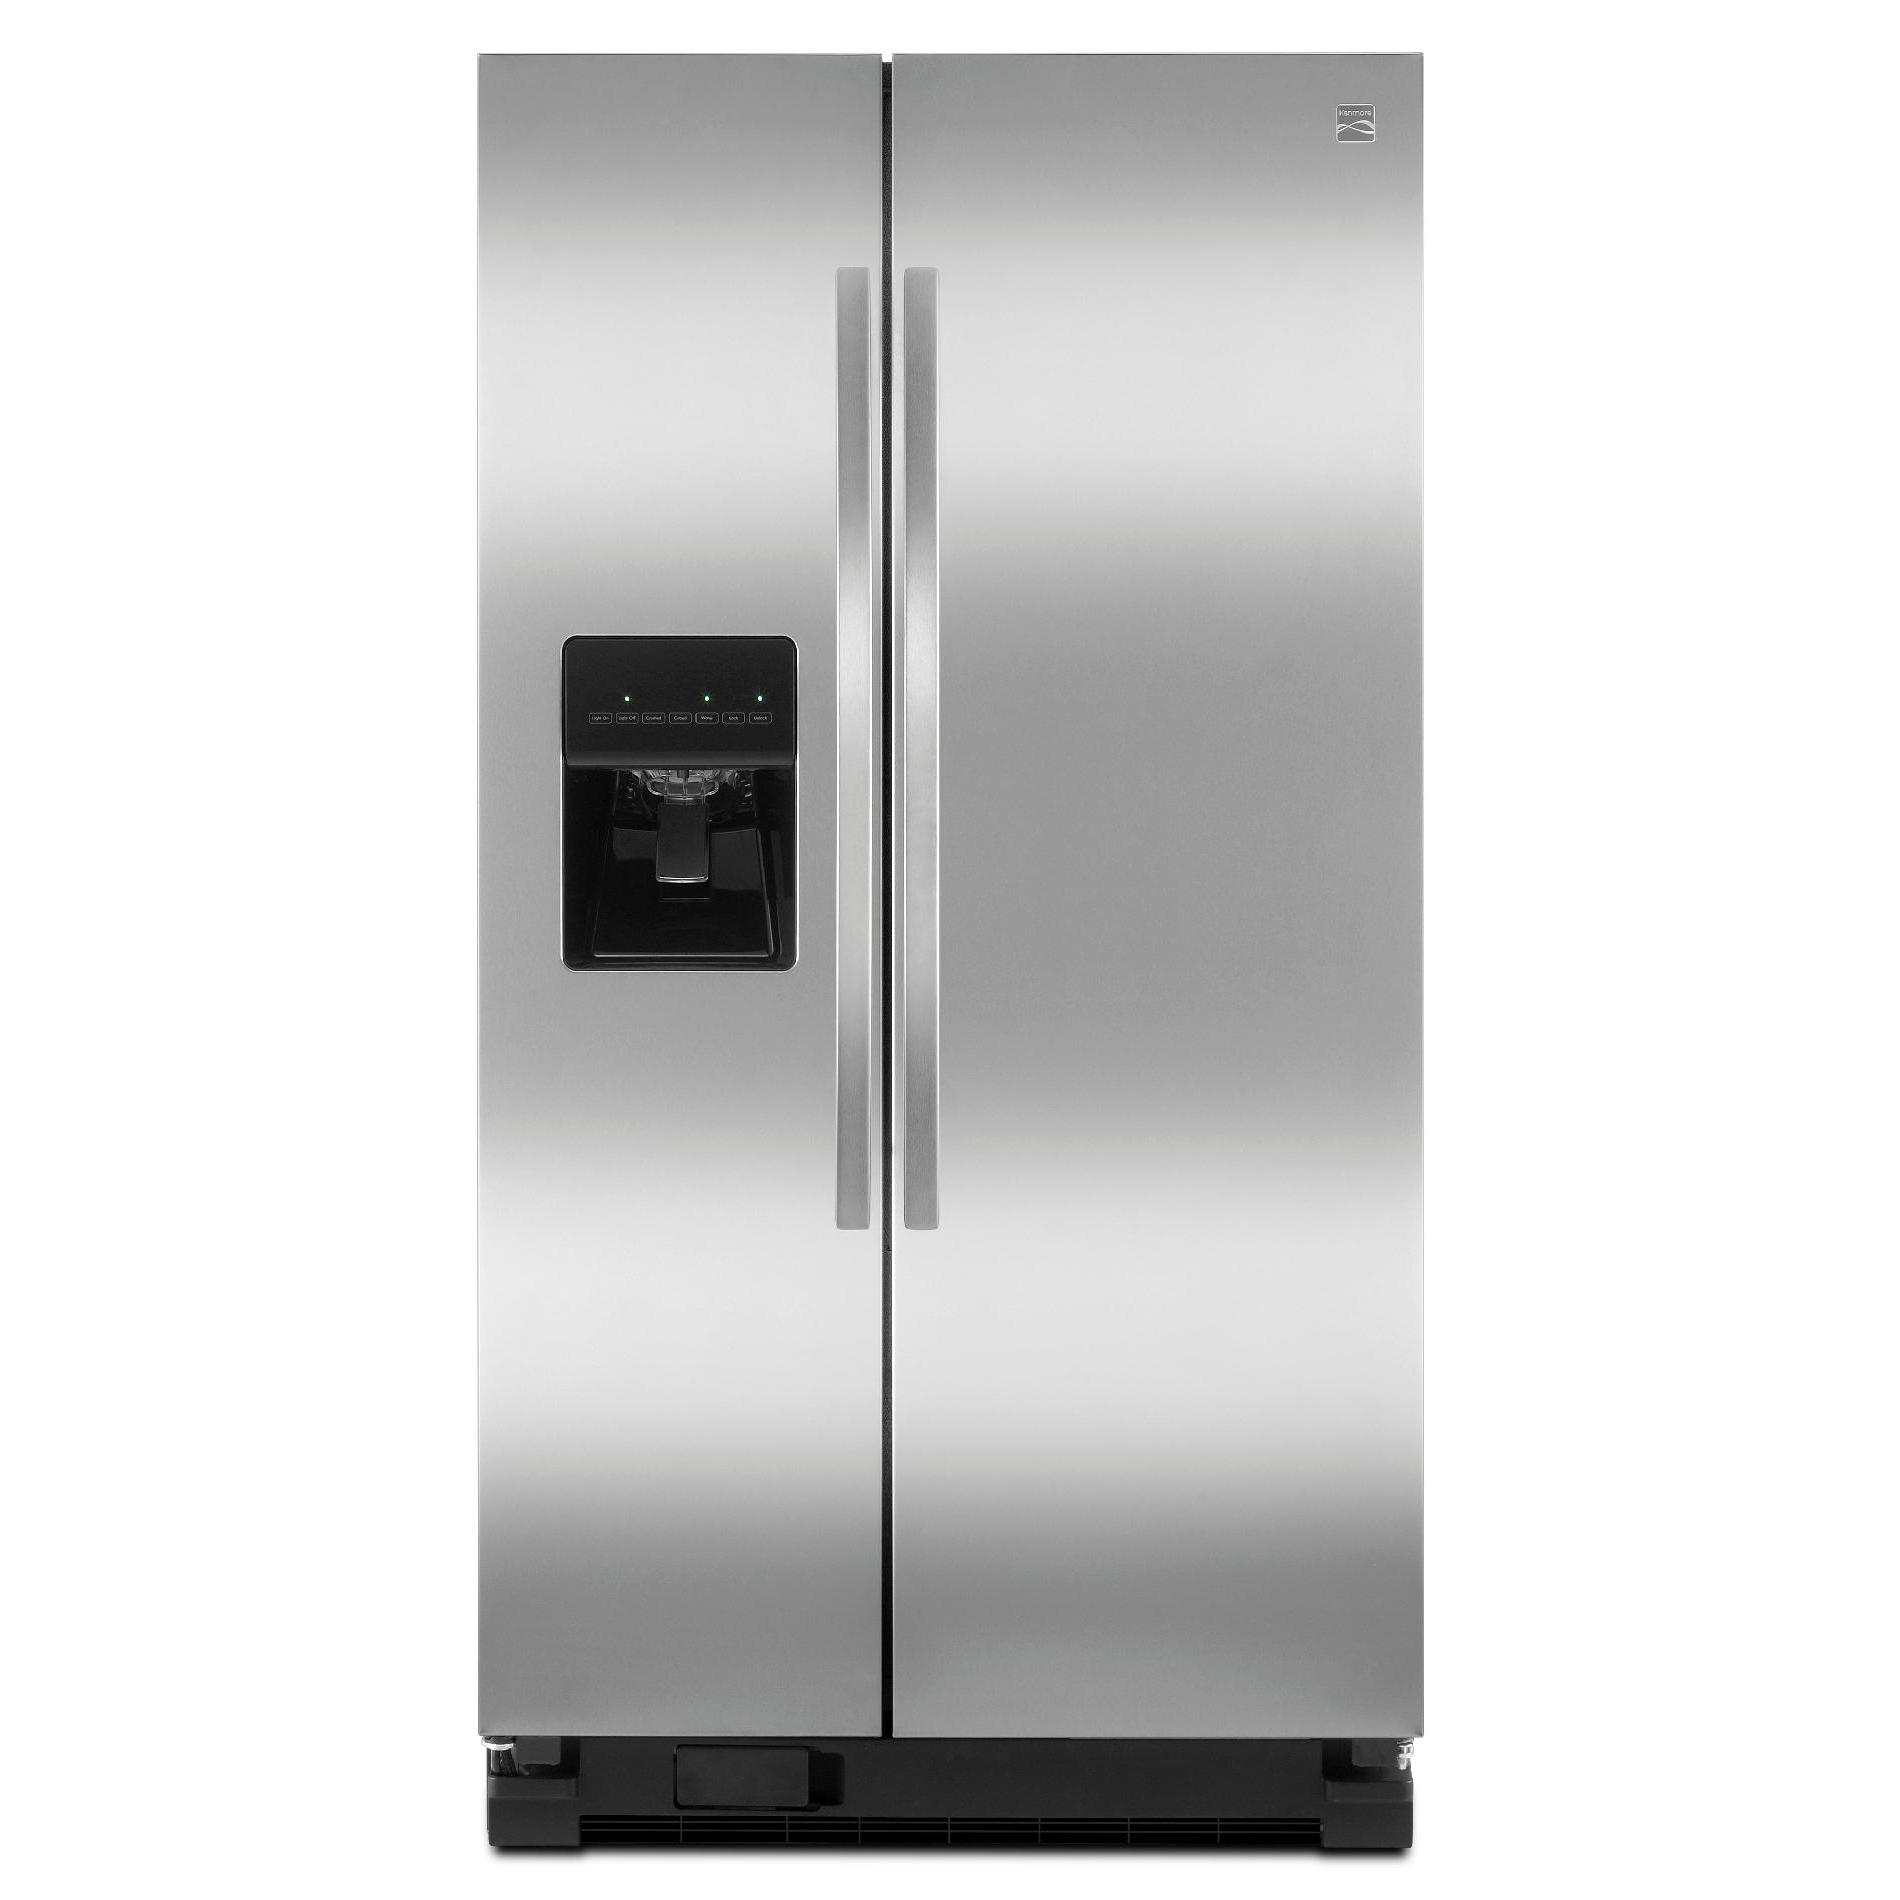 Kenmore 50023 25 cu. ft. Side-by-Side Refrigerator - Stainless Steel Kenmore Stainless Steel Refrigerator Side By Side